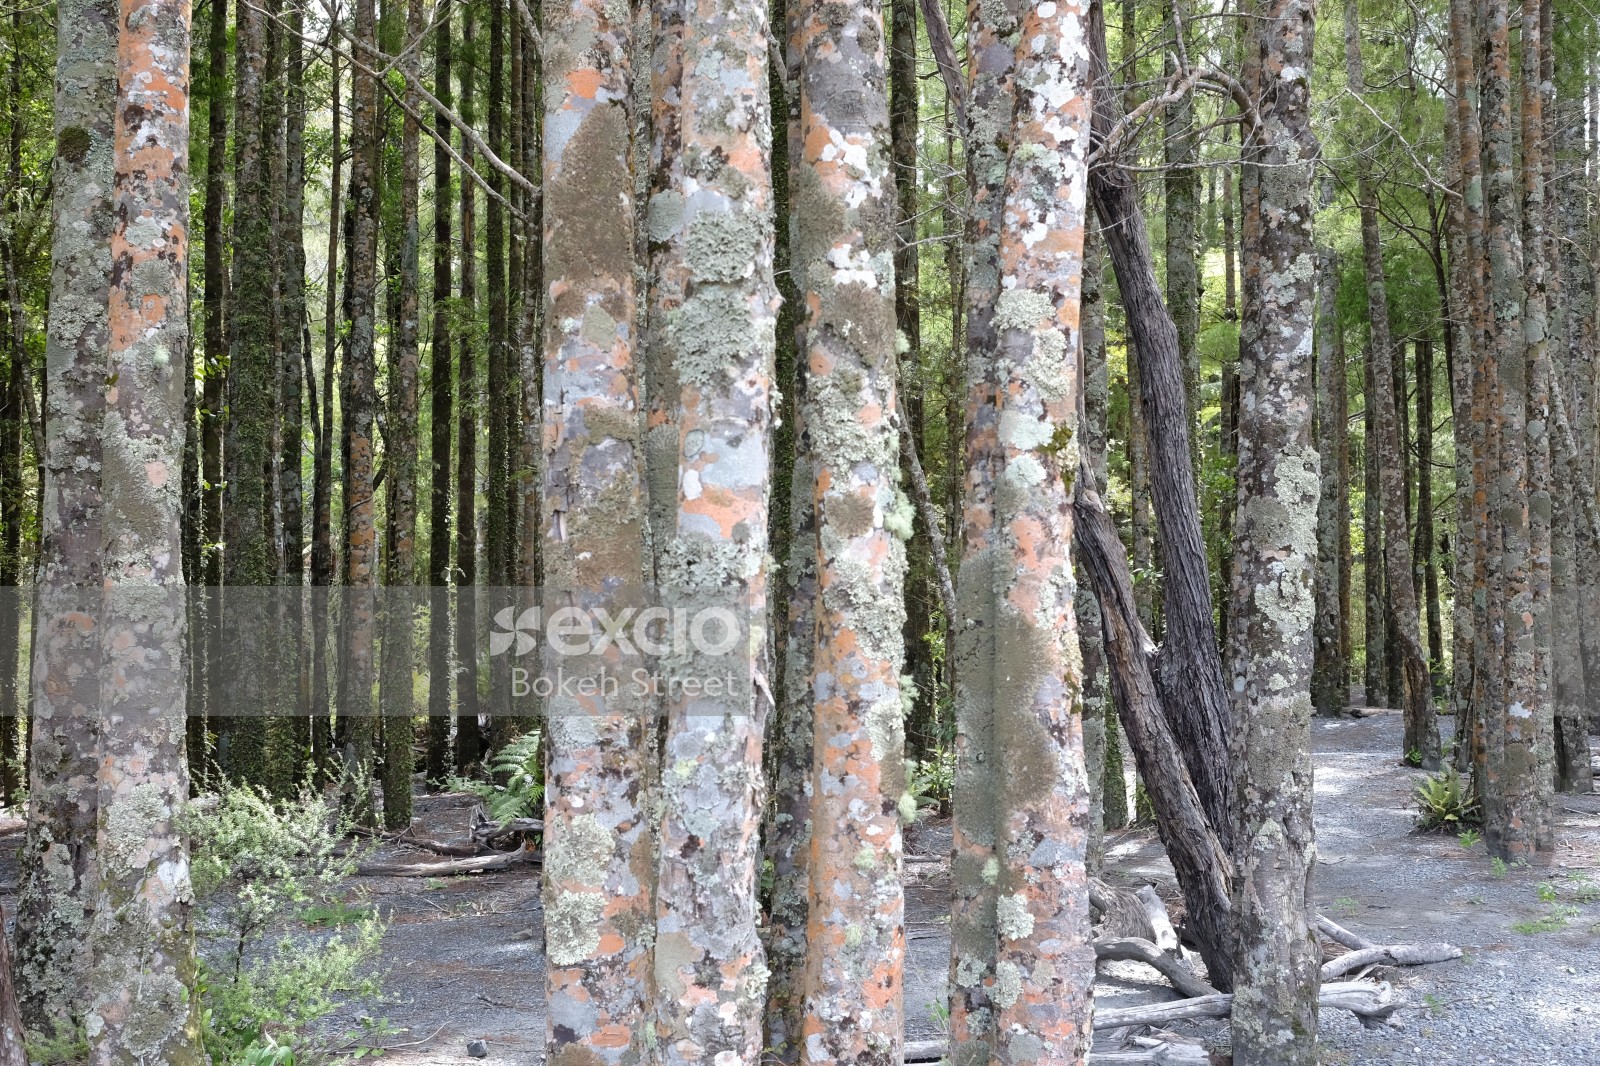 Clustered mossy birch trees